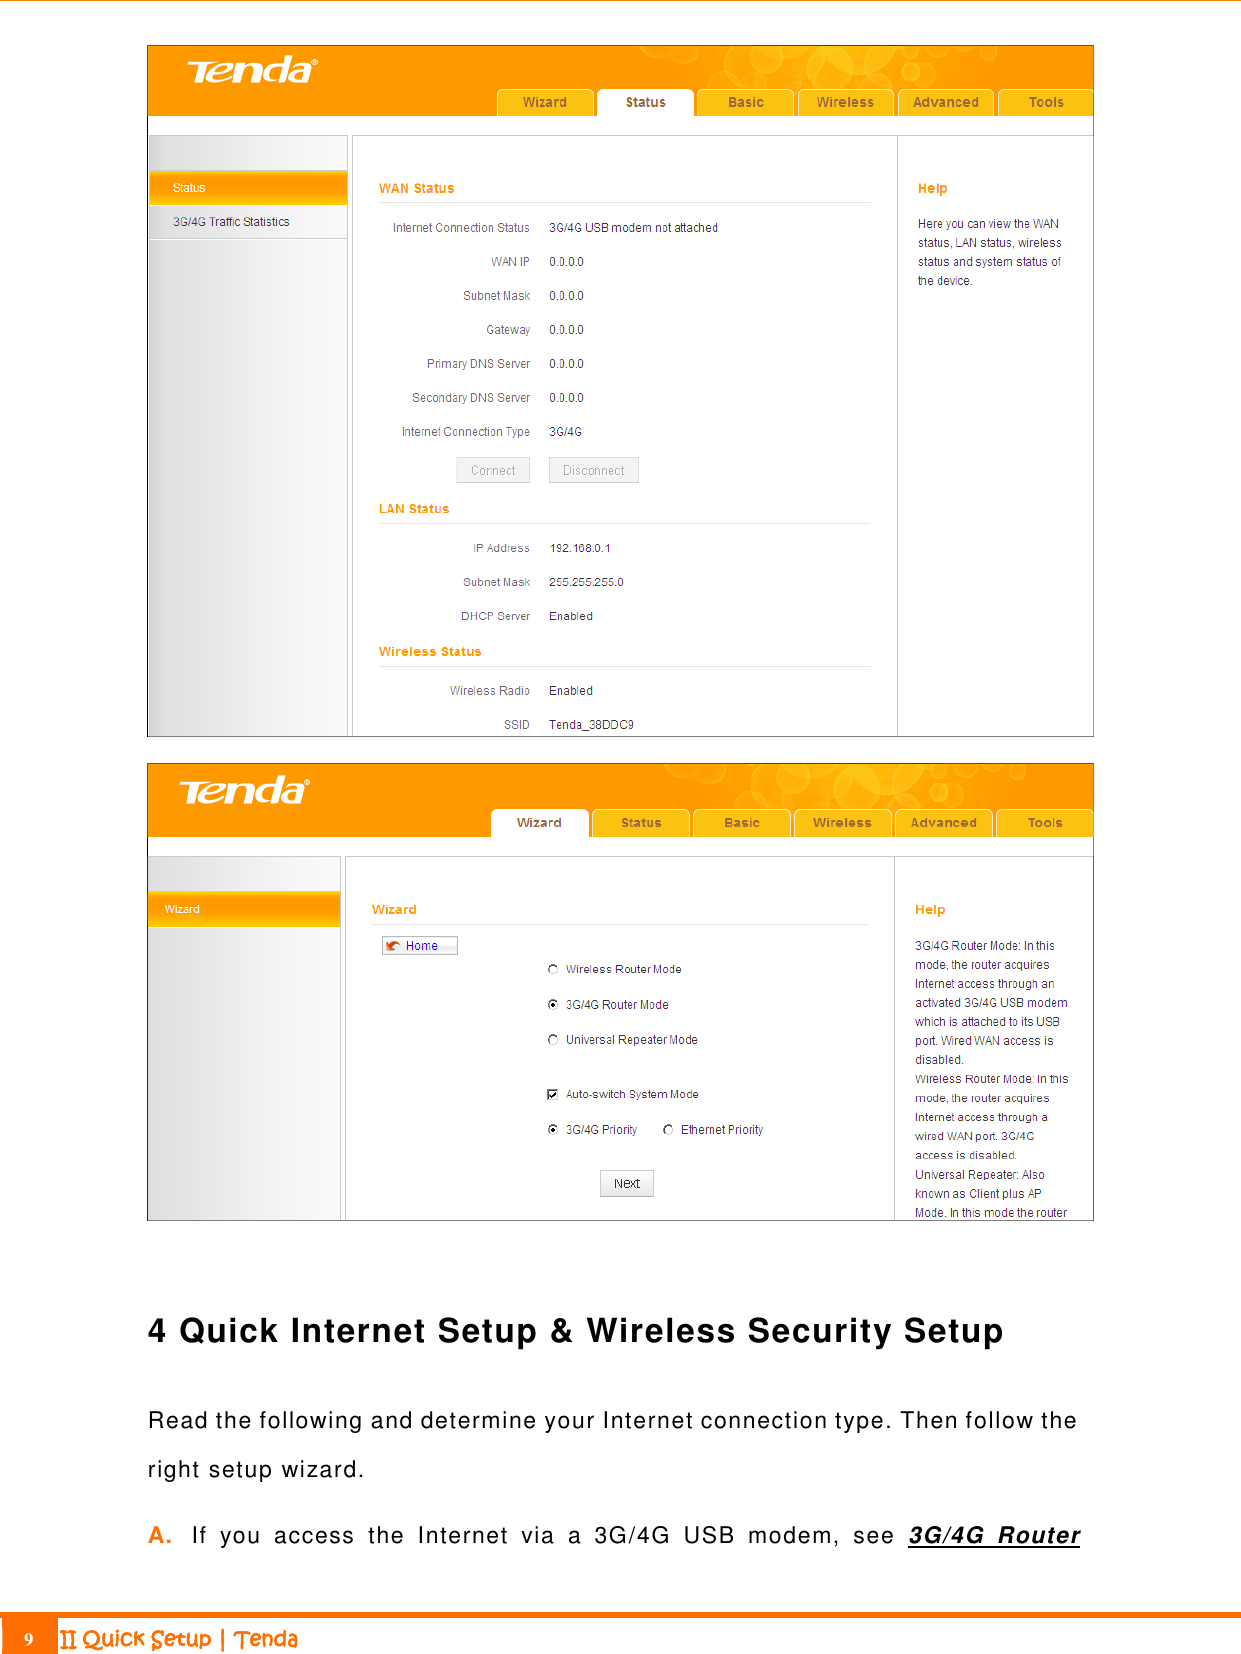                                                                             9 II Quick Setup | Tenda     4 Quick Internet Setup &amp; Wireless Security Setup   Read the following and determine your Internet connection type. Then follow the right setup wizard. A. If  you  access  the  Internet  via  a  3G/4G  USB  modem,  see  3G/4G  Router 